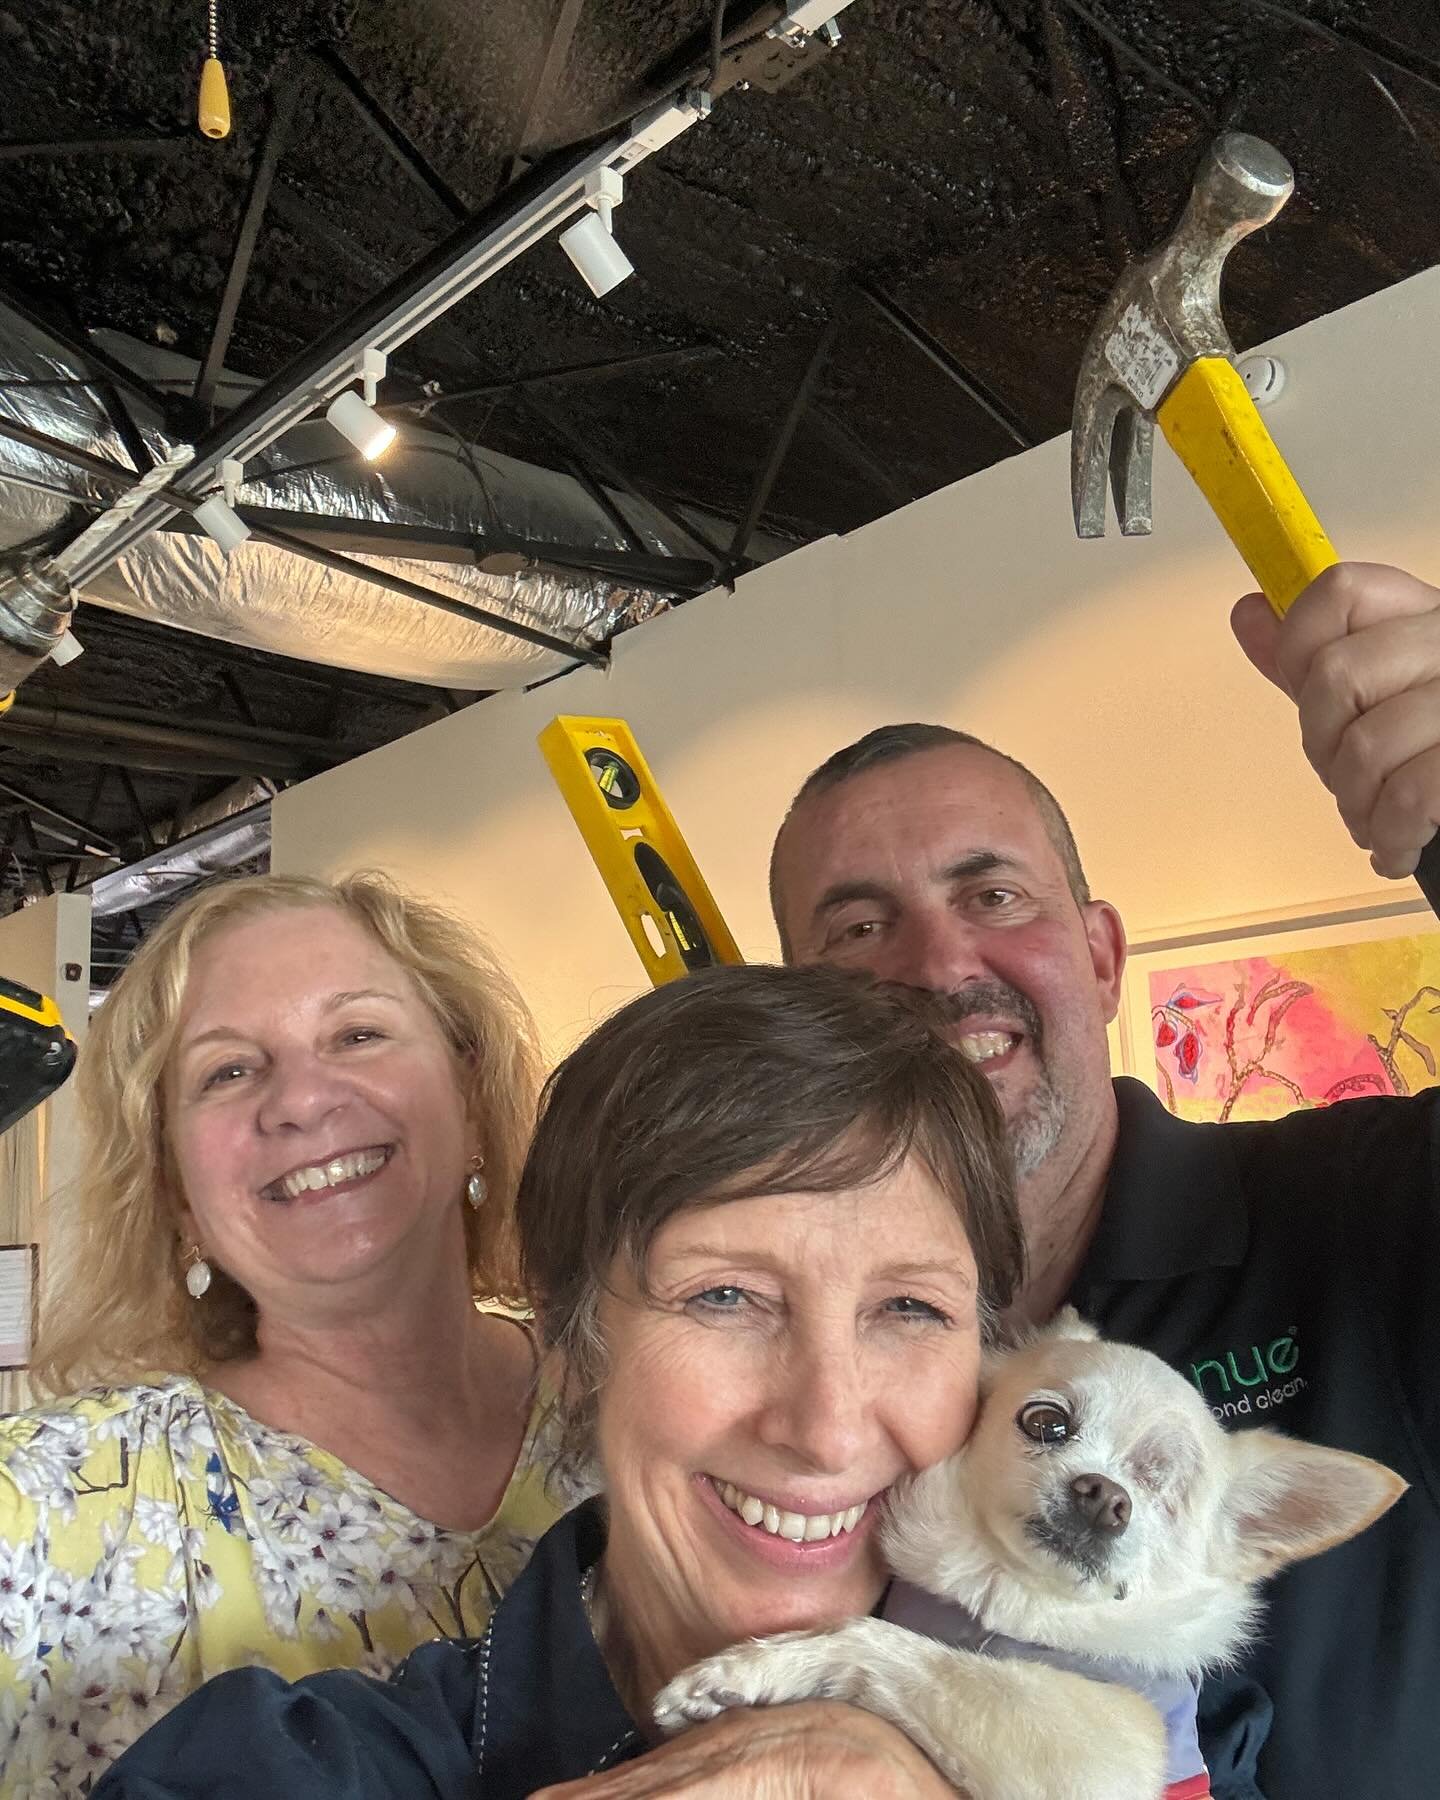 Install team for the Women in Art A Joyful Journey Exhibition is hard at work! This show is going to be EPIC! @cblamar @katherinebaronetartistdallas @andrealamarsaude and of course, Cooper! See you Saturday night for the opening!